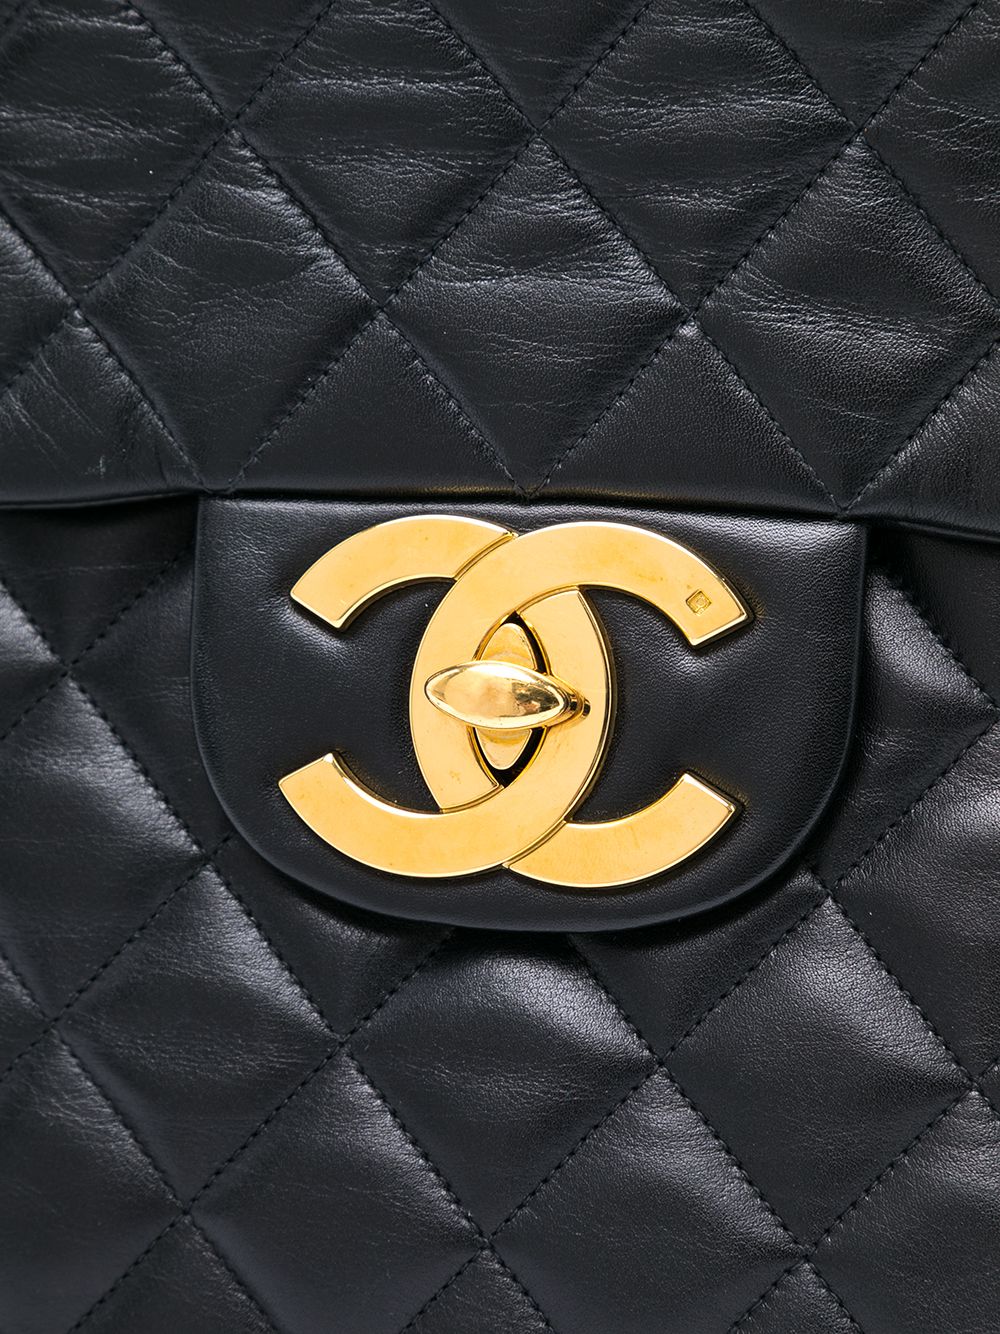 Chanel Pre-owned 1995 Jumbo Classic Flap Shoulder Bag